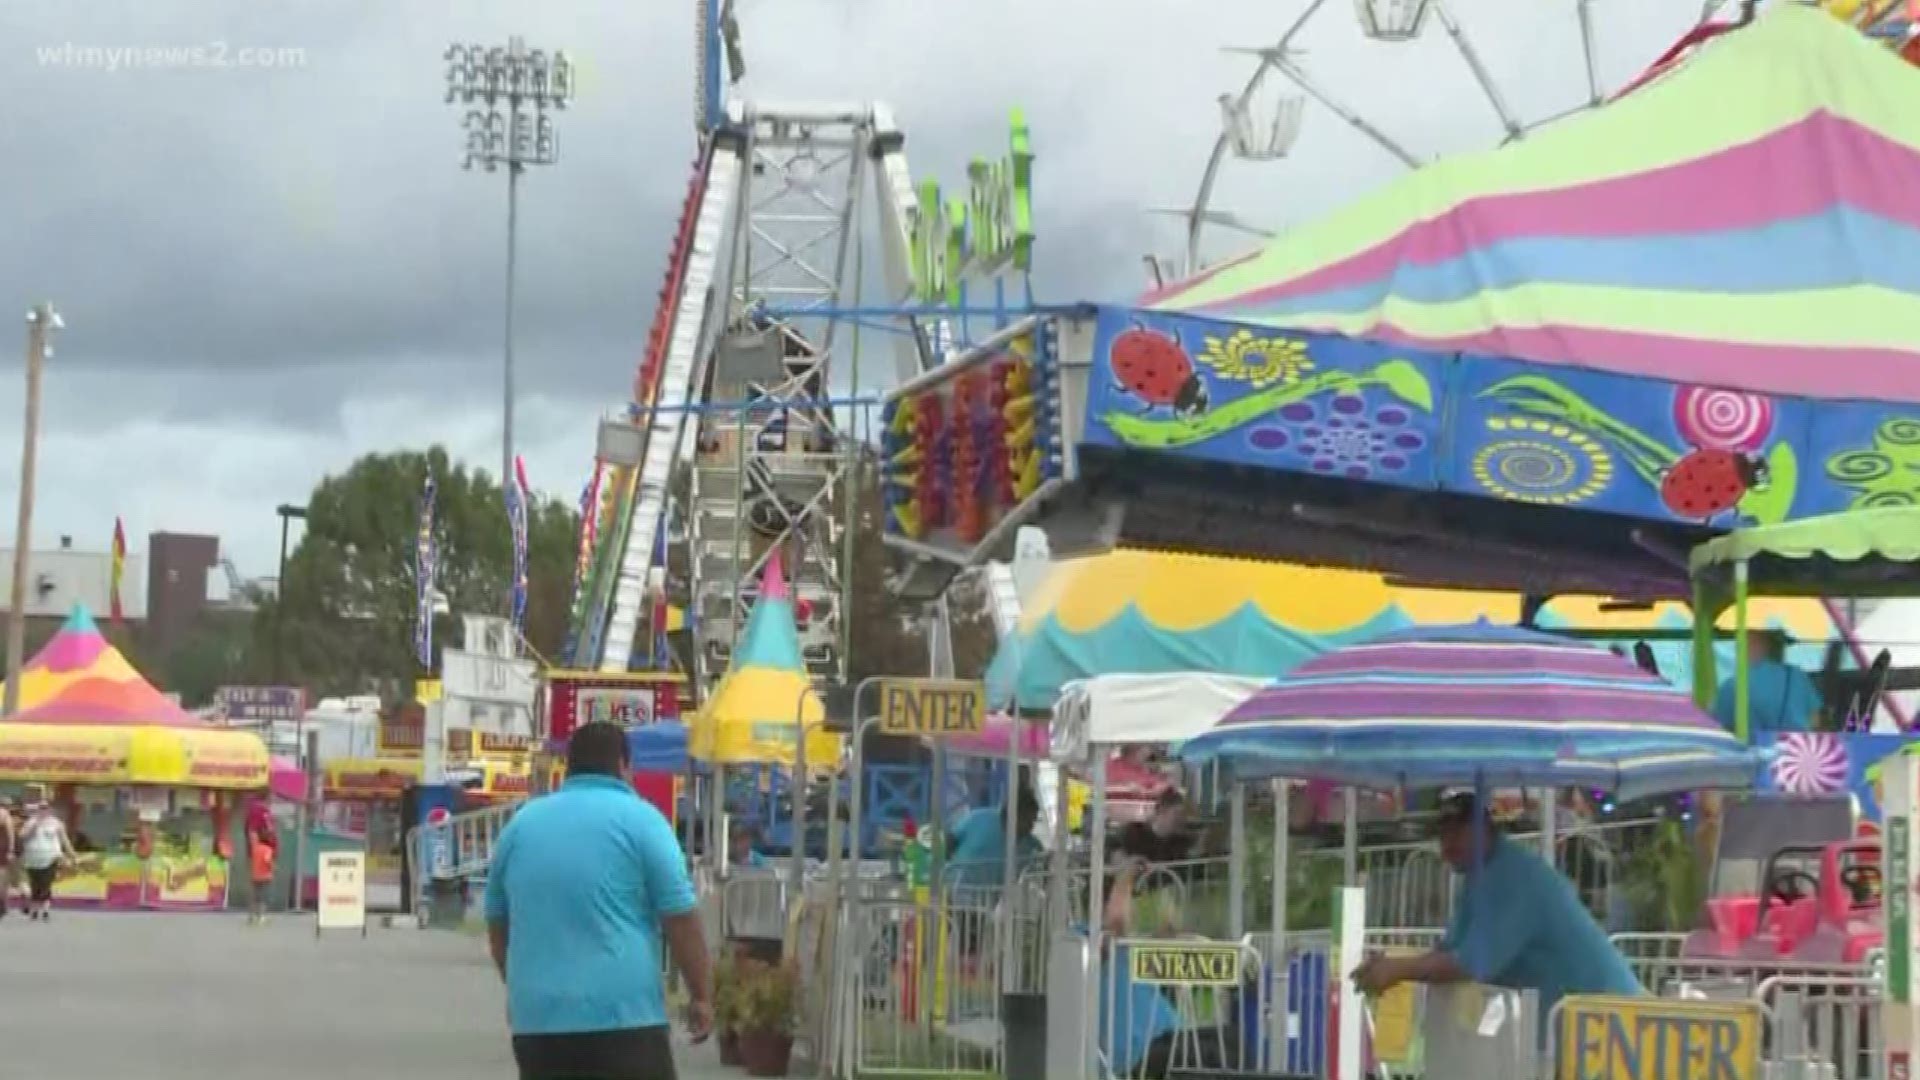 A group has asked the Winston-Salem City Council to change the name of the Dixie Classic Fair.